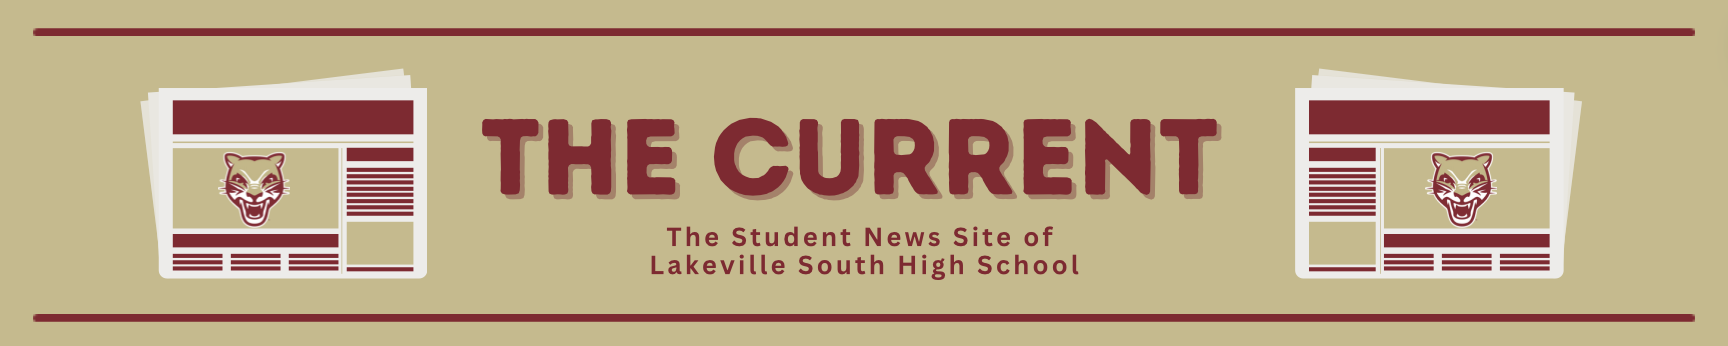 The Student News Site of Lakeville South High School